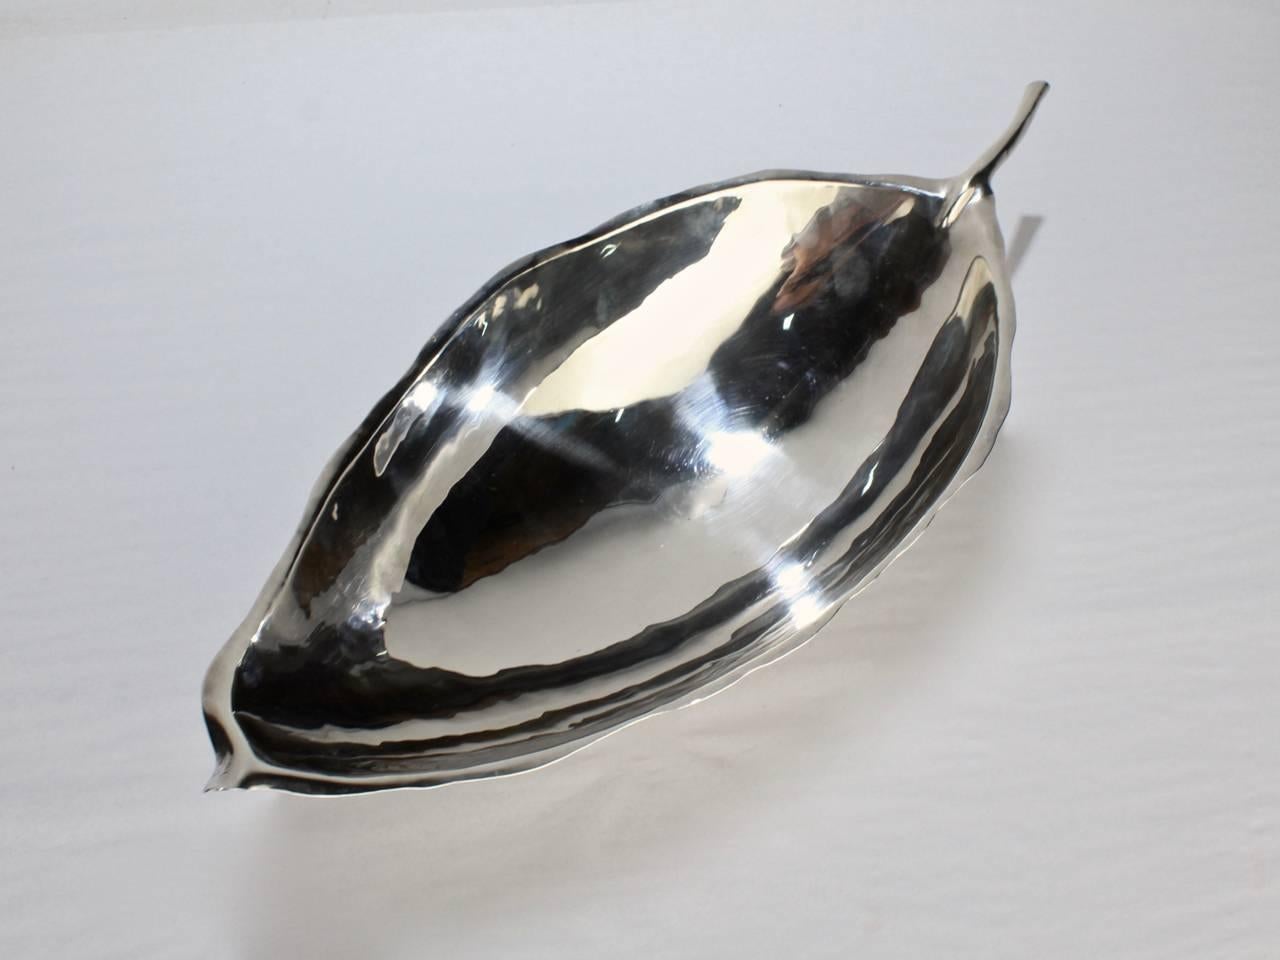 Large Mid-Century Sterling Silver Leaf Bowl by Alfredo Sciarrotta for Cartier 1